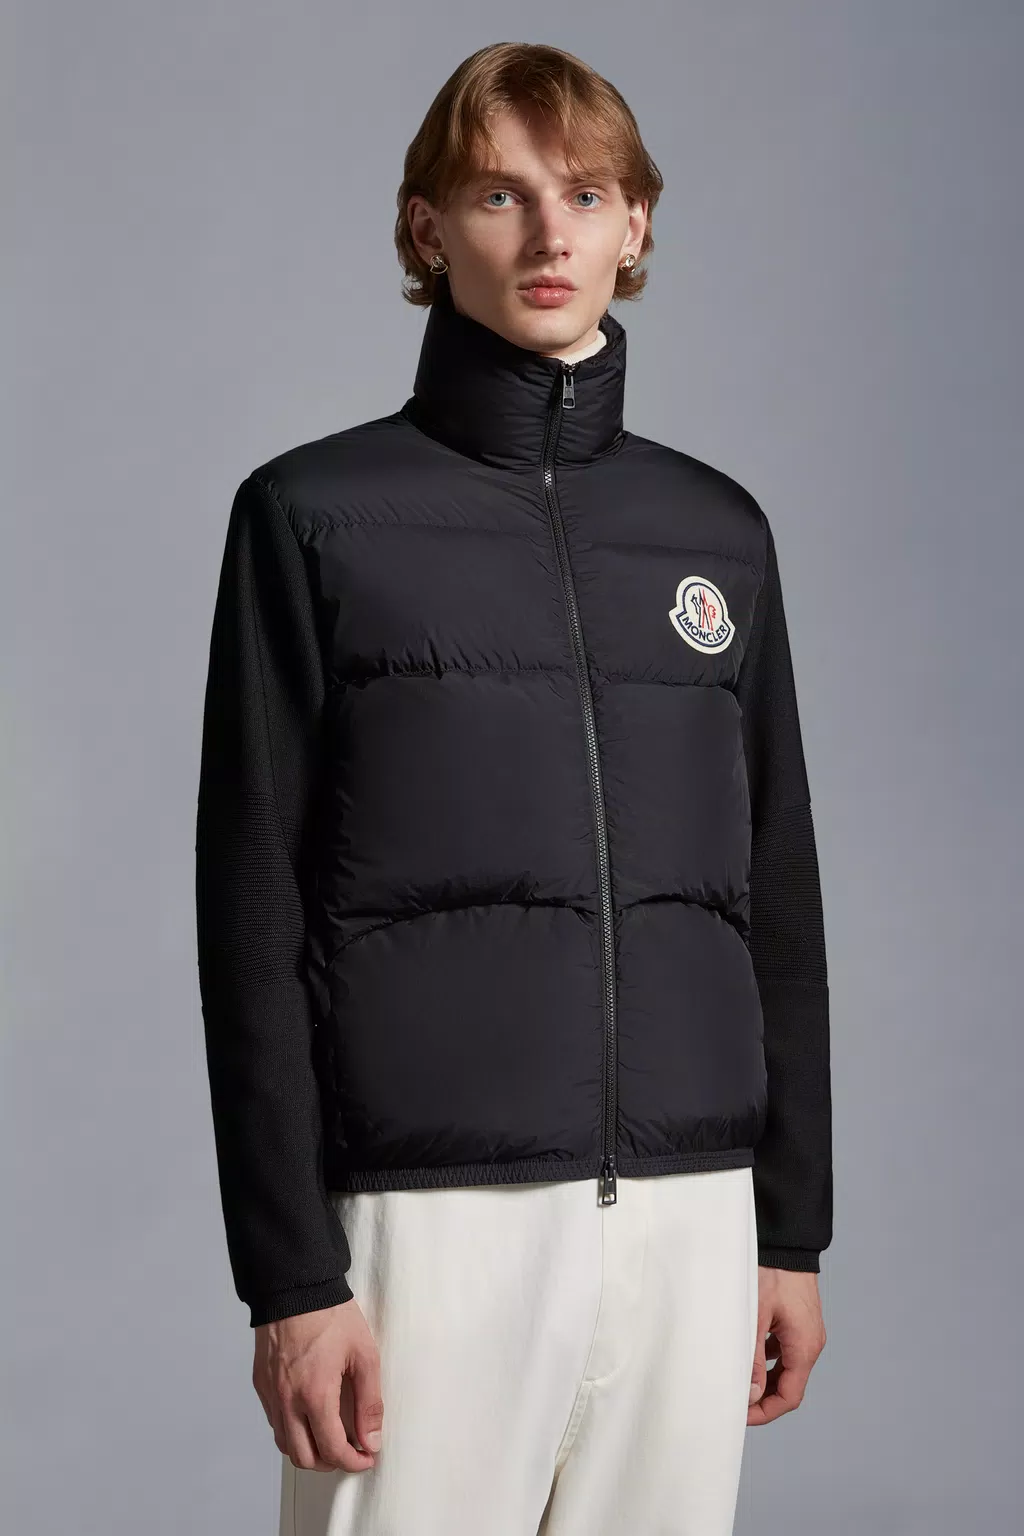 Knit Sweaters, Cardigans & Jumpers for Men | Moncler US